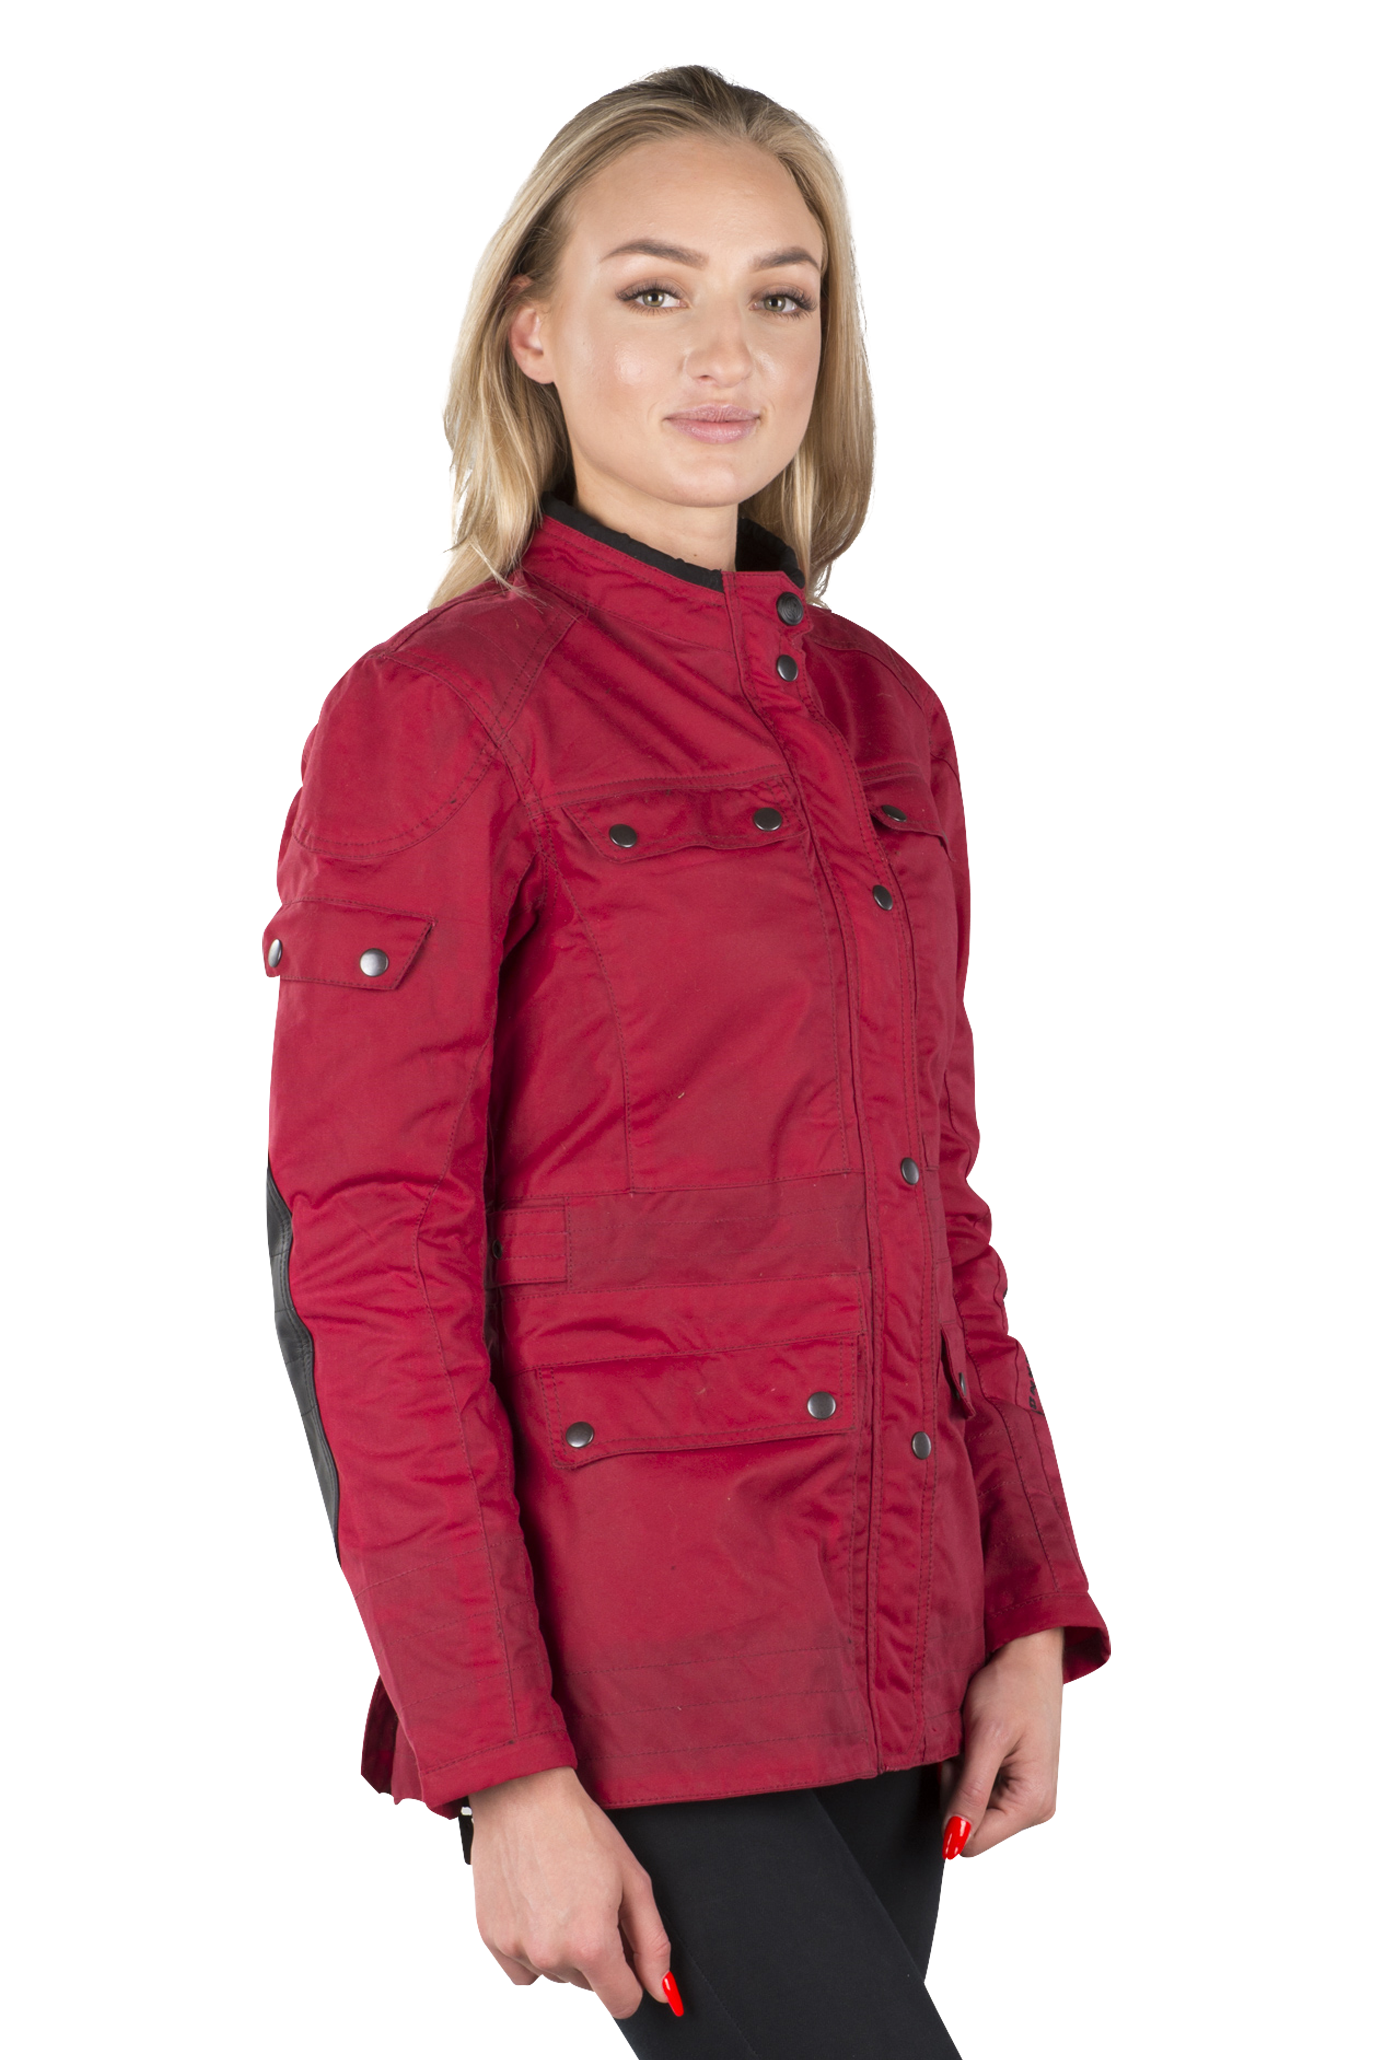 Chaqueta Roland Sands Ginger Mujer Roja